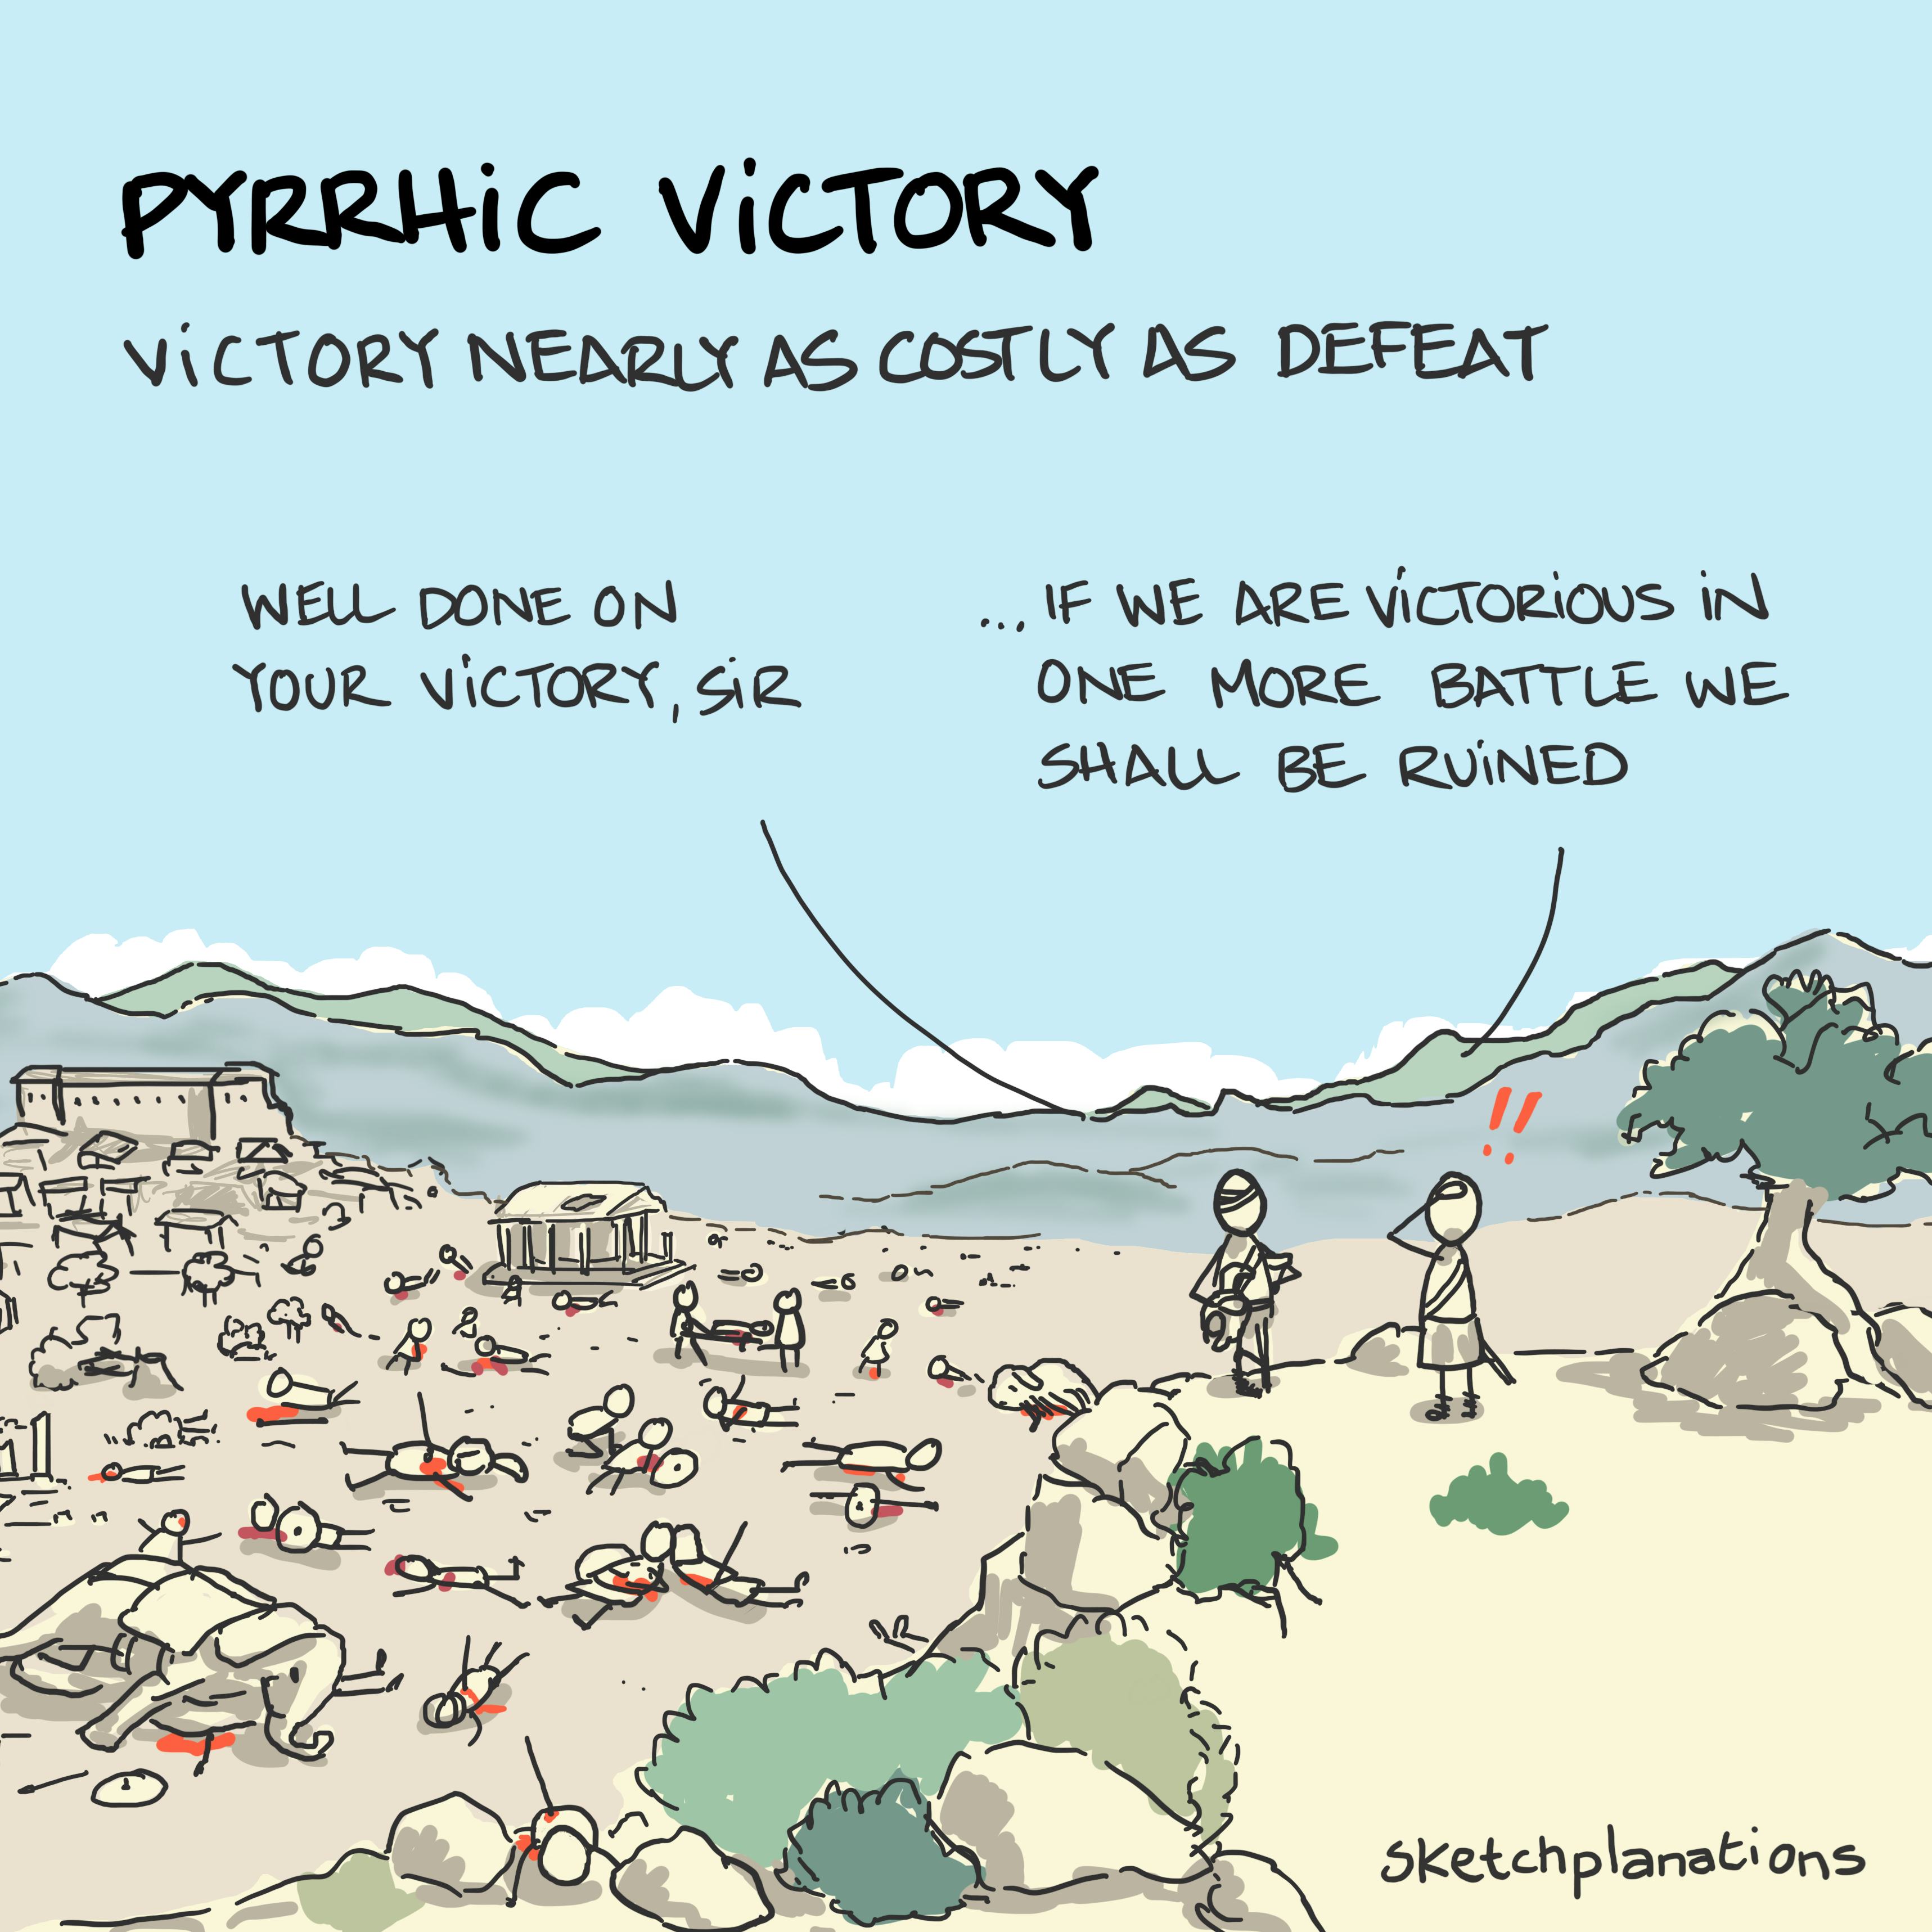 Pyrrhic victory: King Pyrrhus laments a victory that wasn't worth winning as he surveys the remains of his troops after a victory on the battlefield